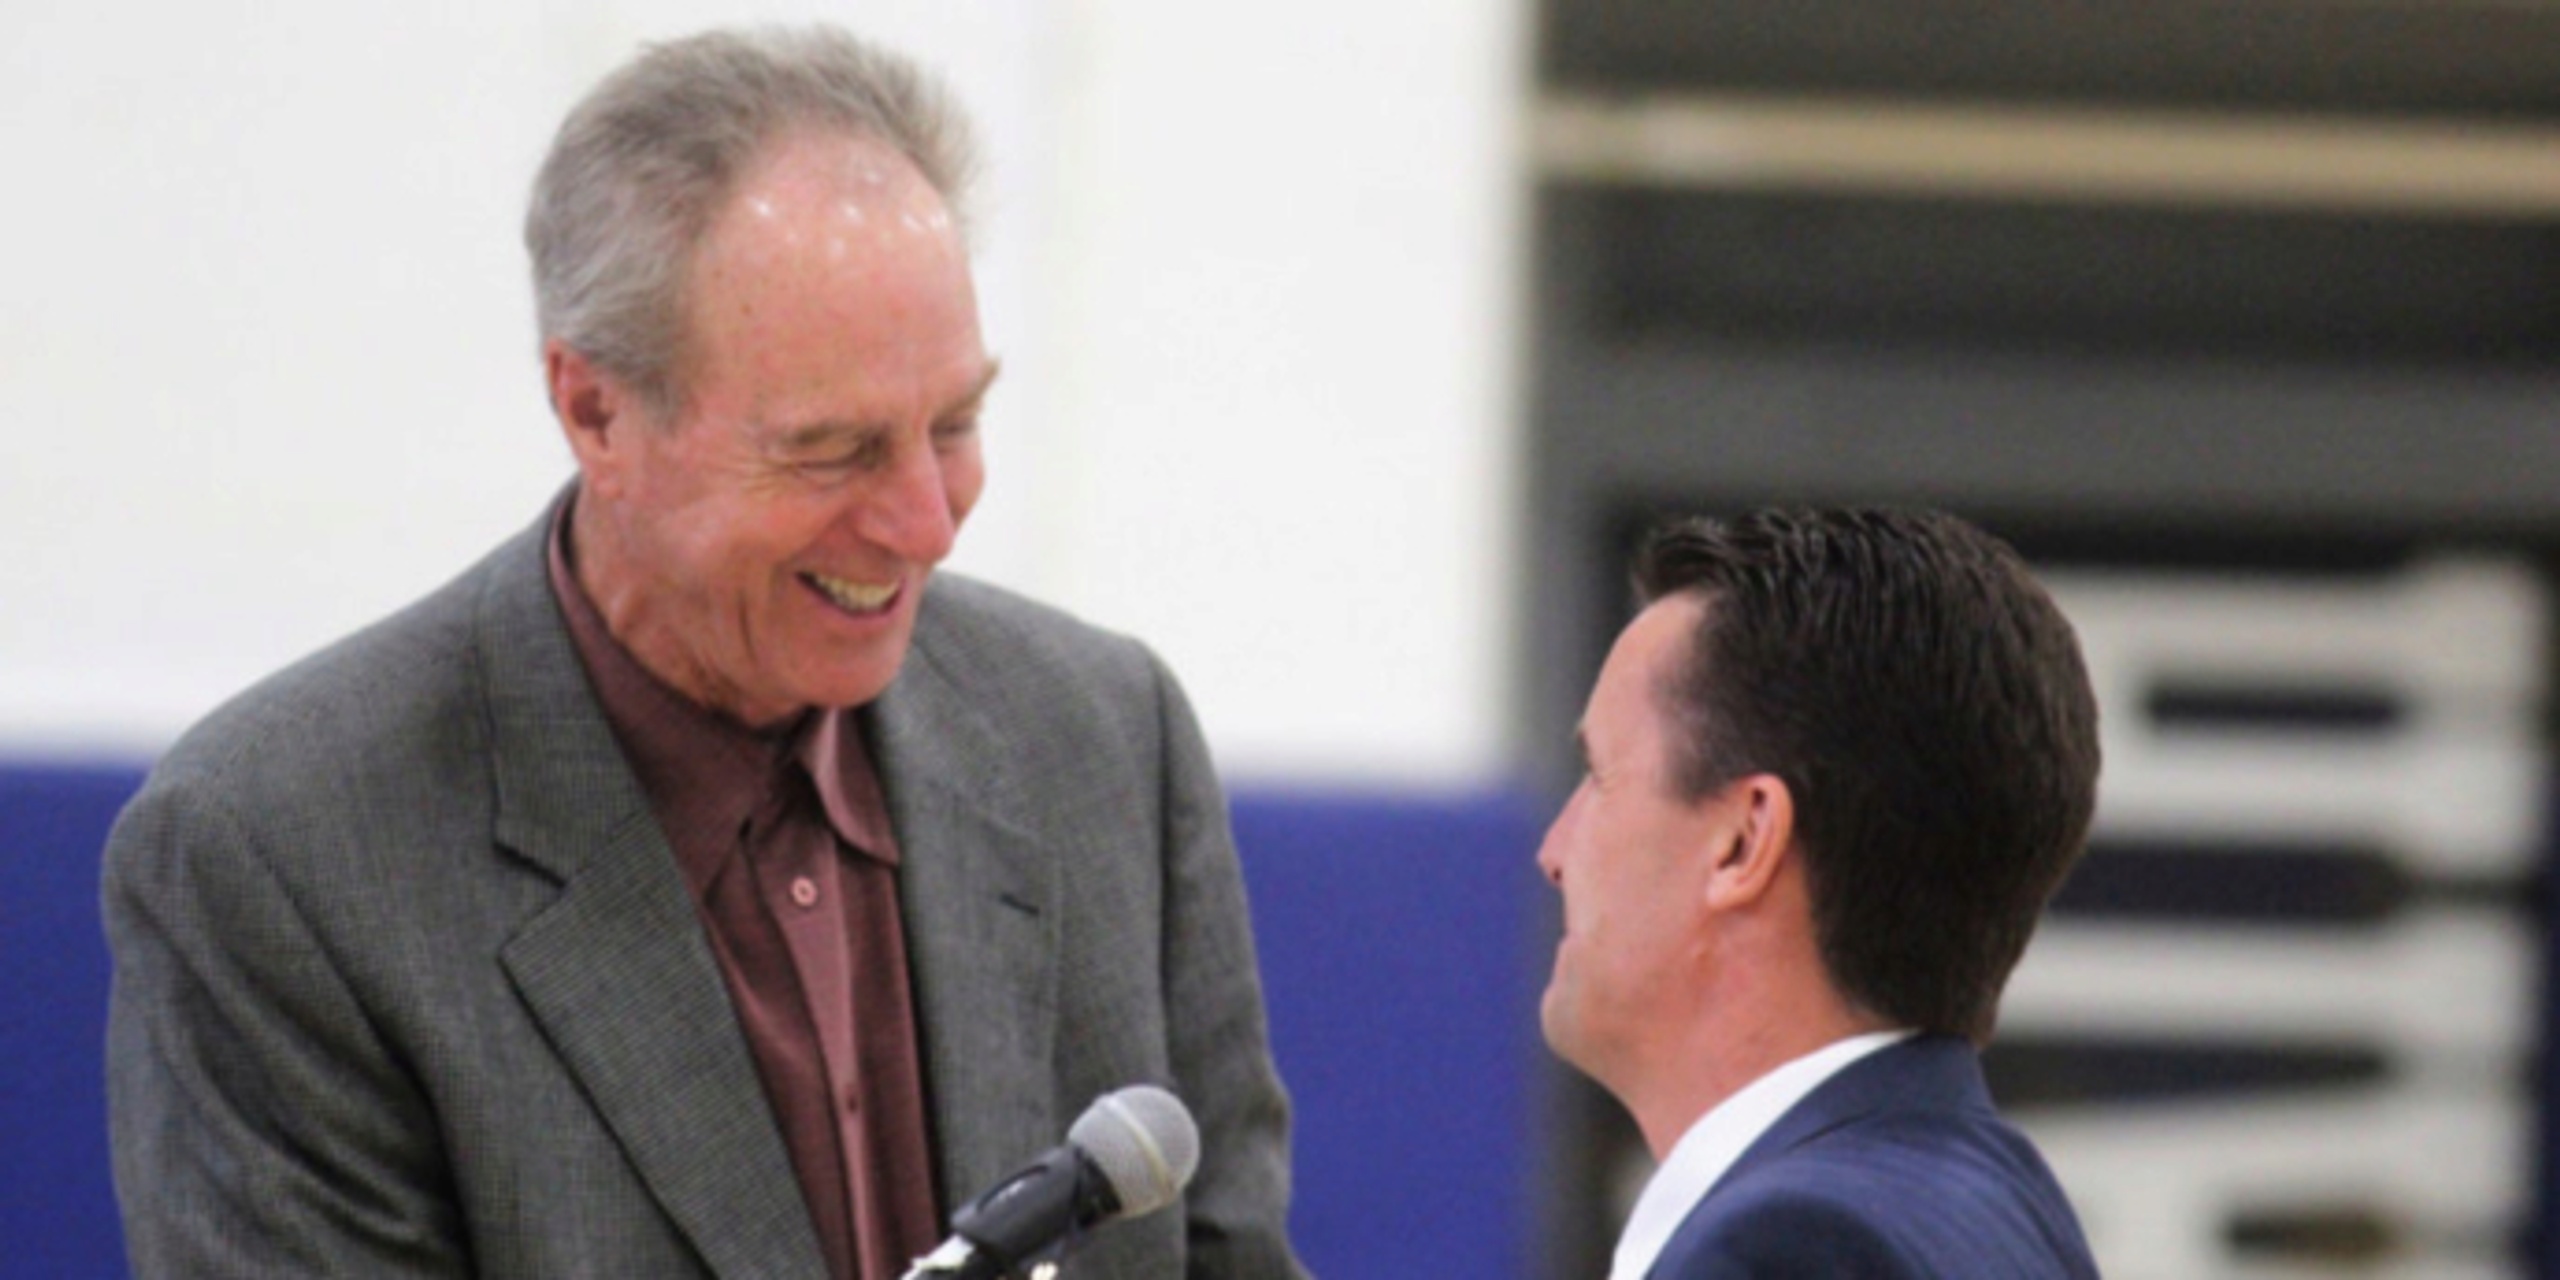 NBRPA names Dave Cowens, Grant Hill, others to Board of Directors